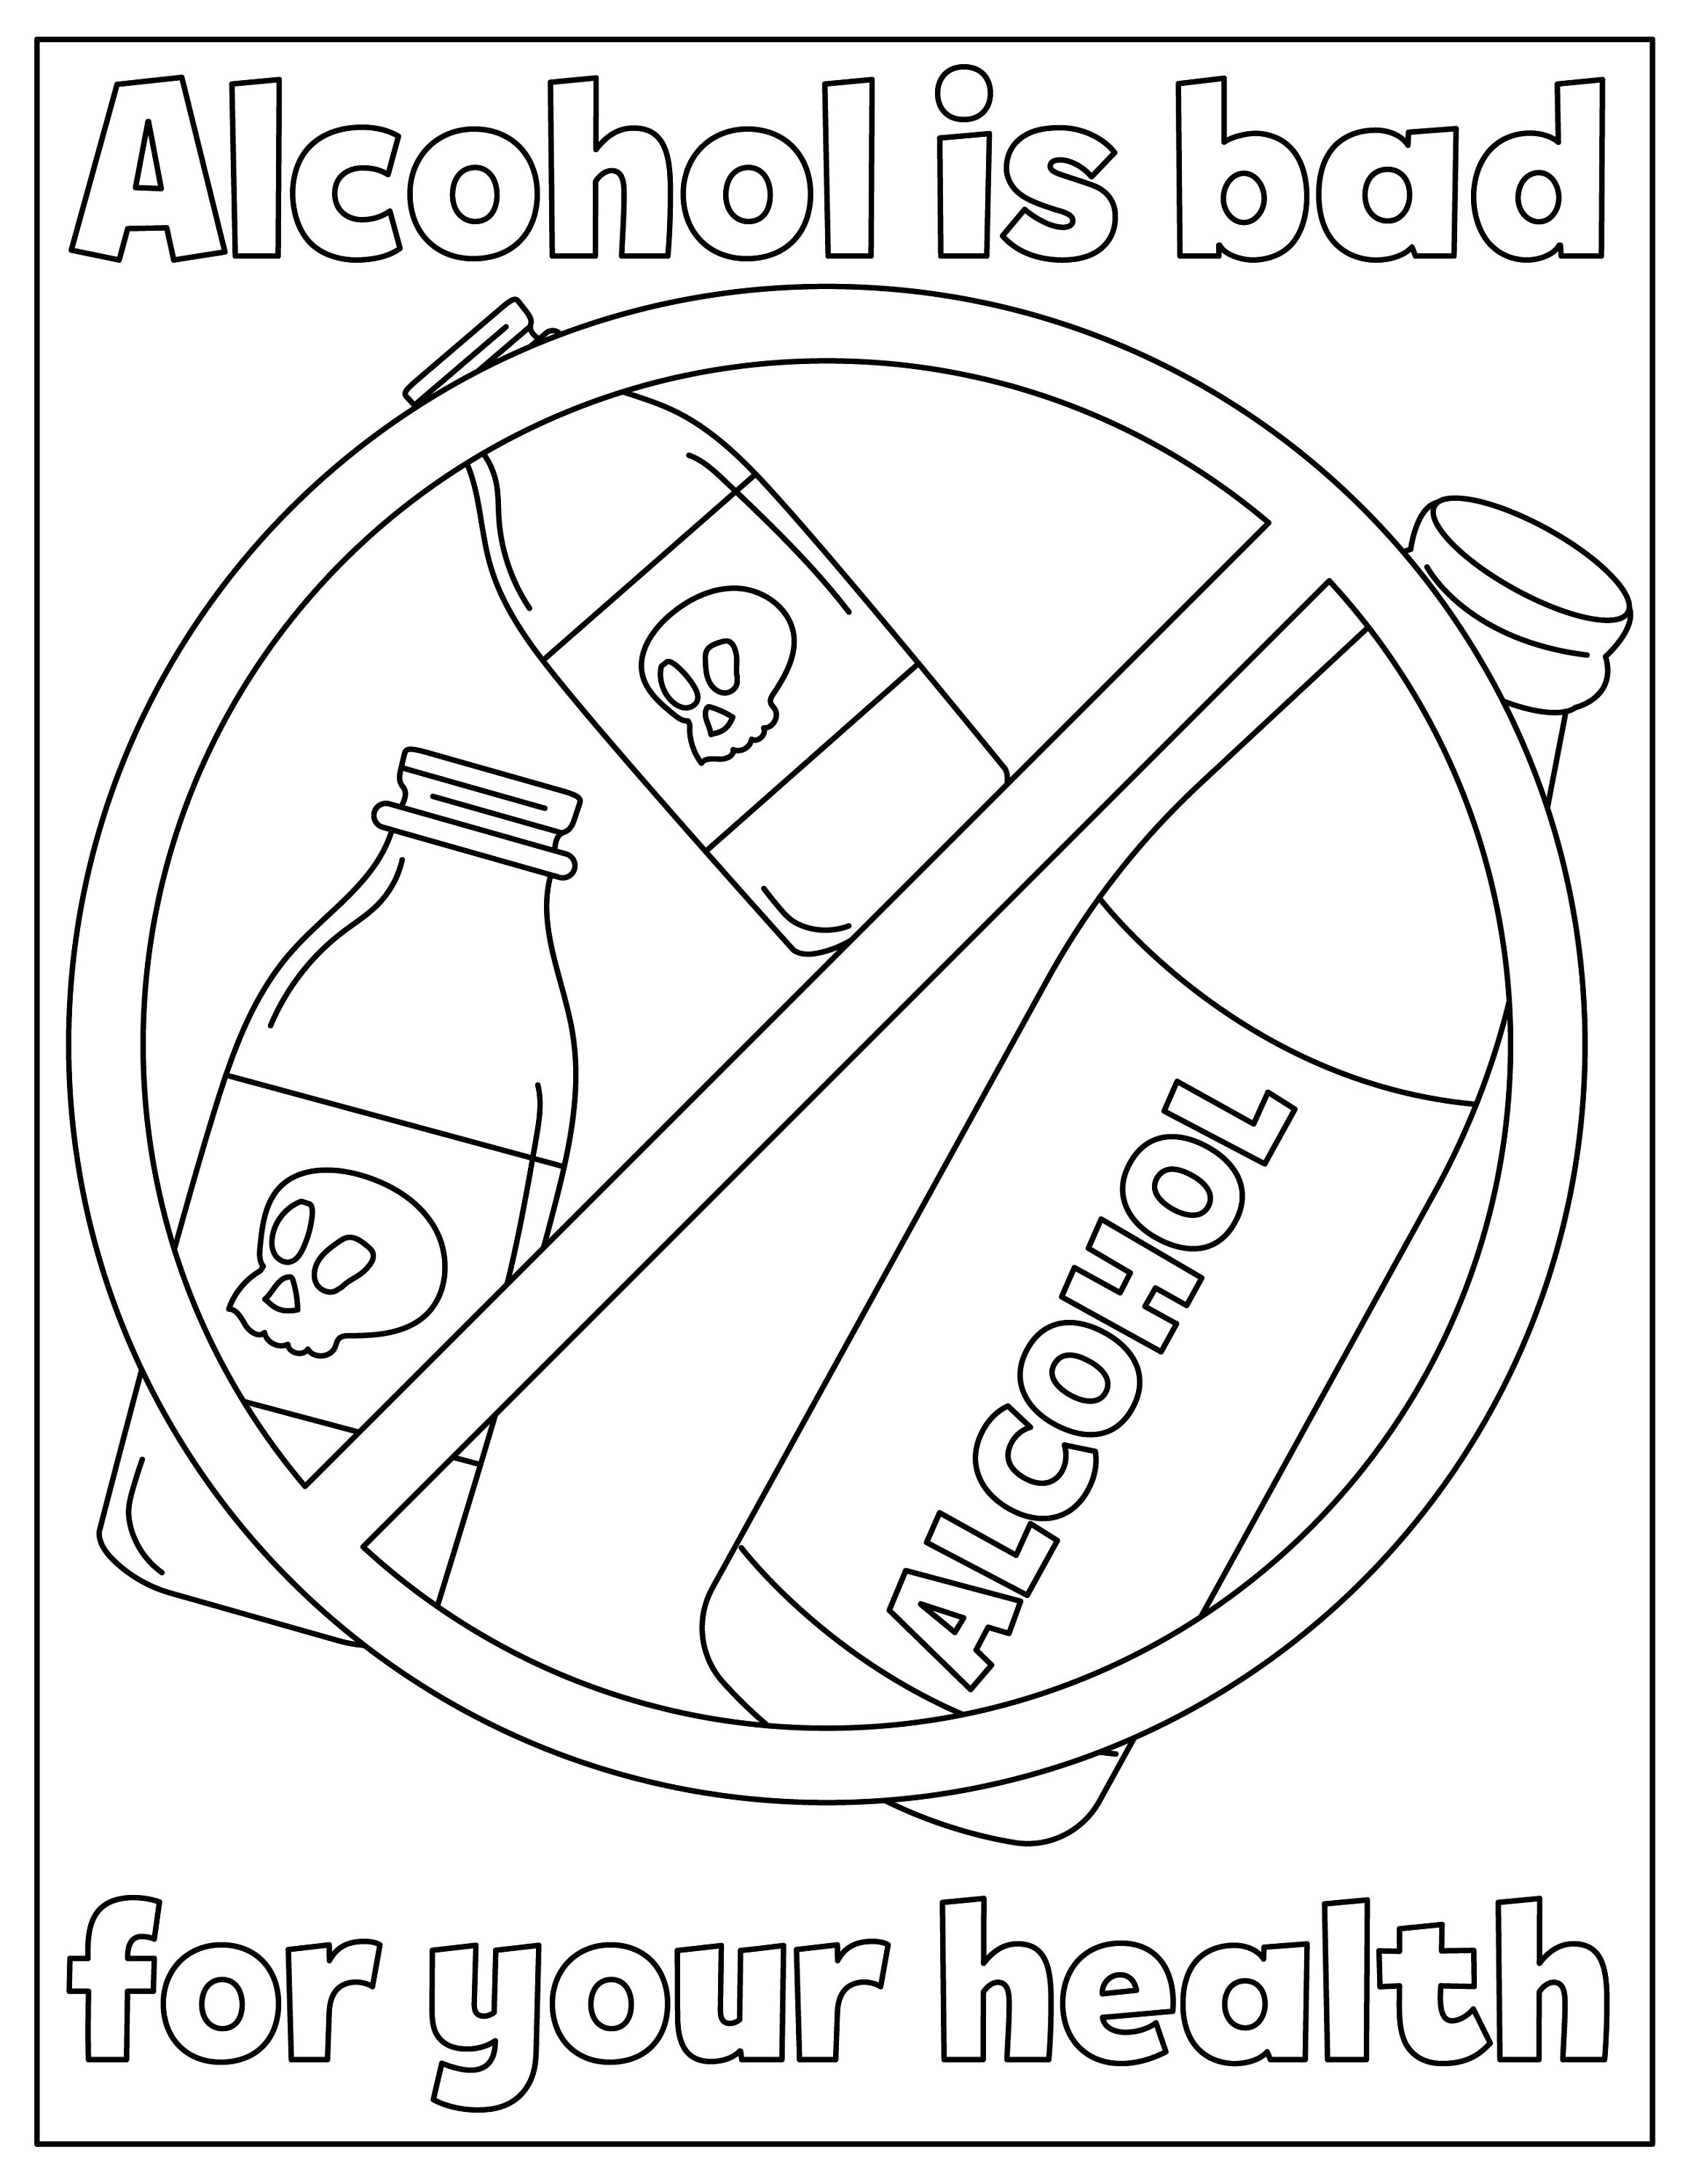 Coloring book coloring pages for kids coloring pages printable say no to drugs coloring book black owned shops coloring book pdf